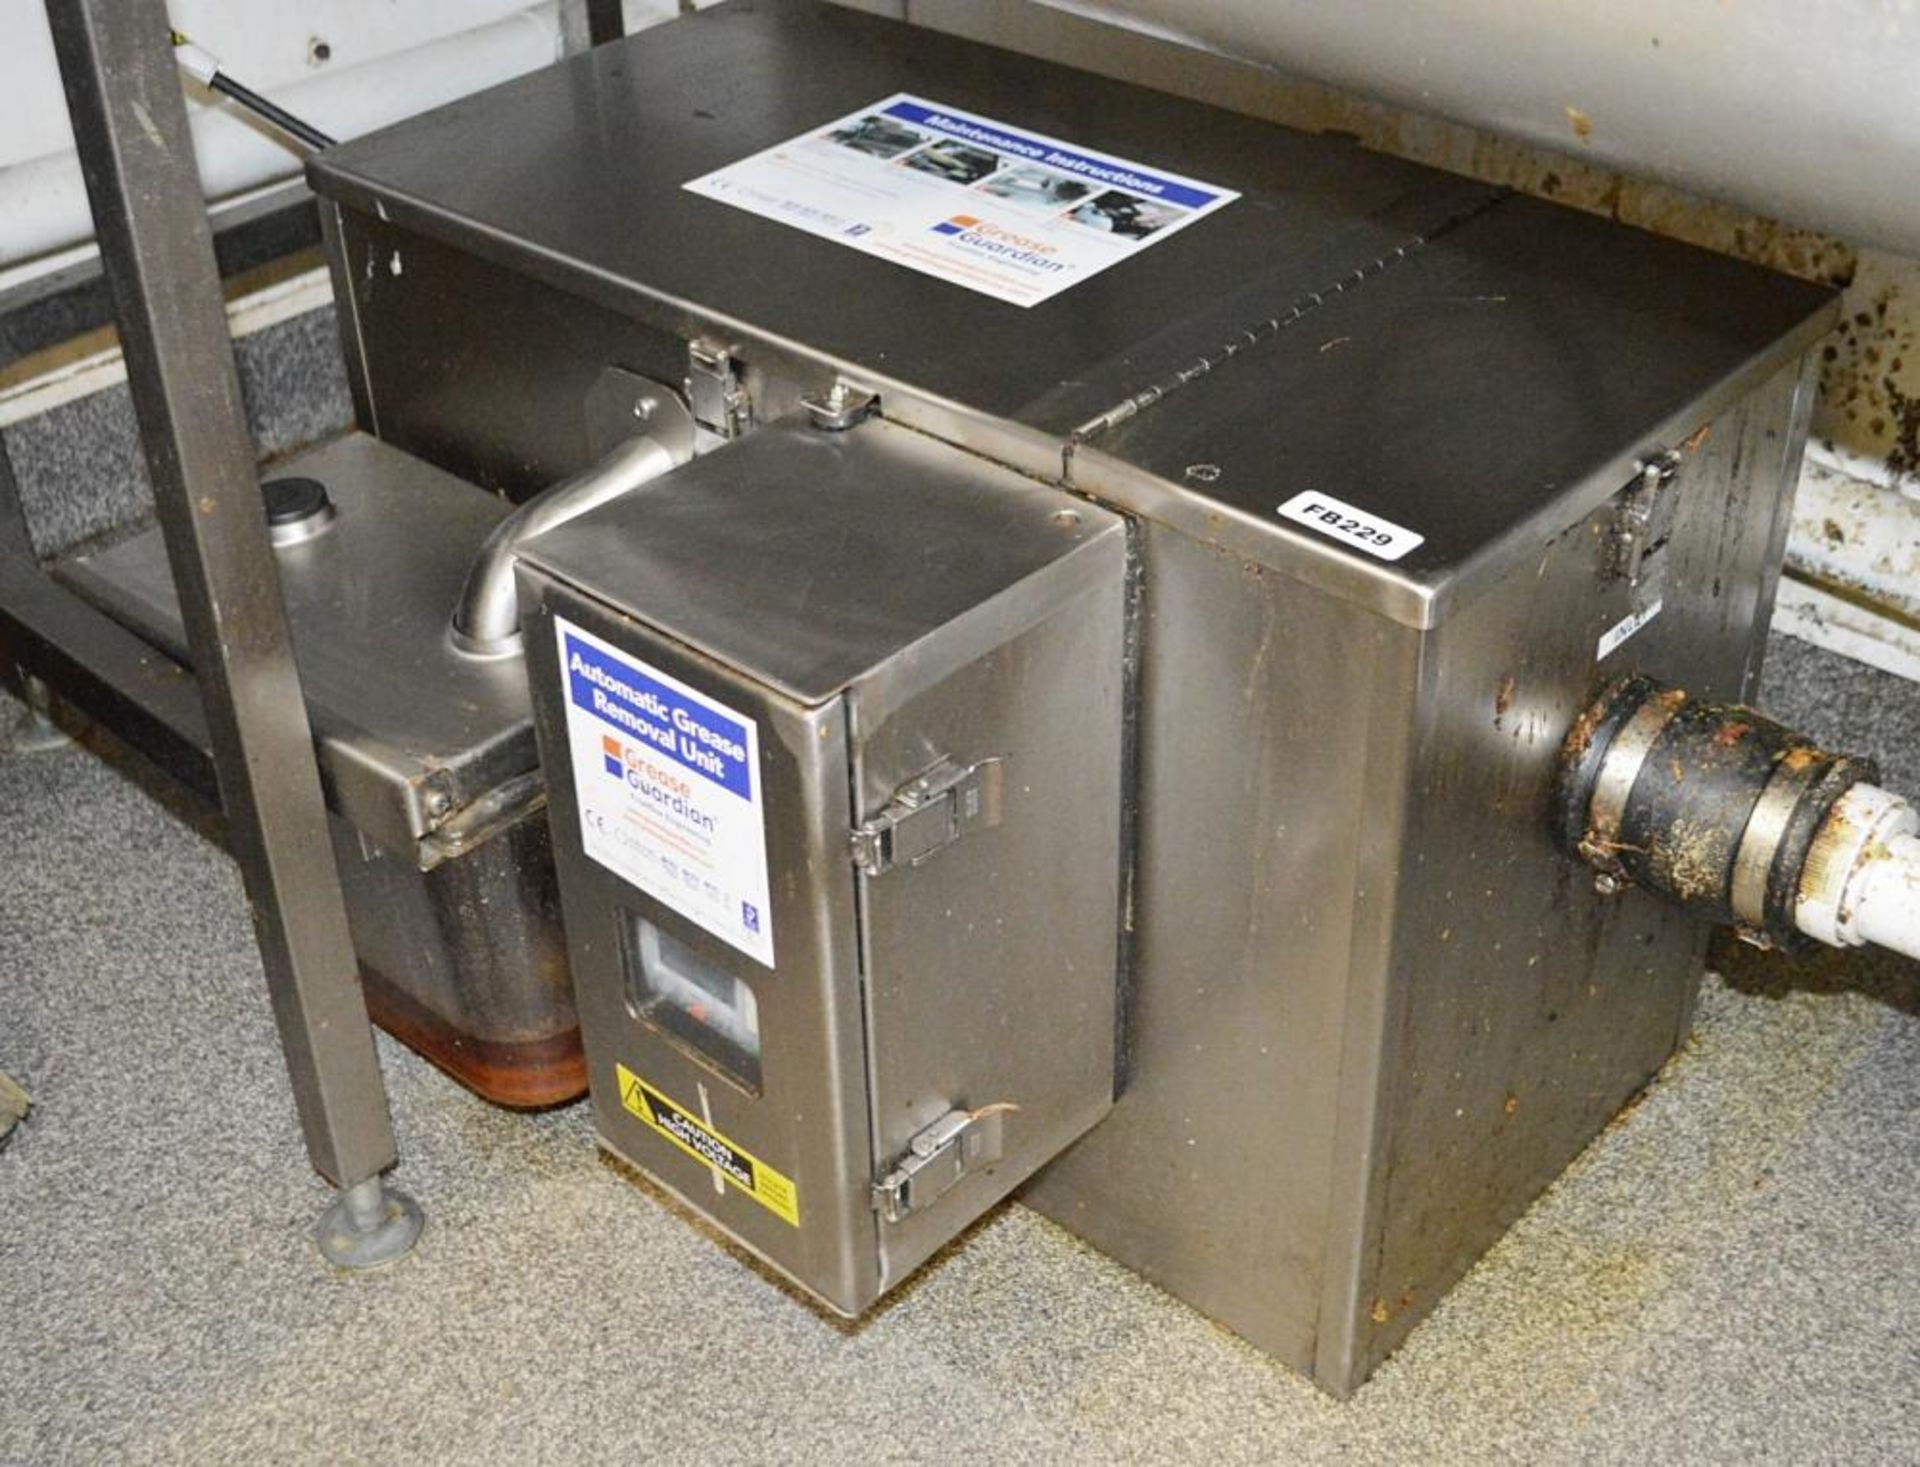 1 x 'Grease Guardian' Automatic Grease Removal Unit - Features A Digital Panel And Stainless Steel F